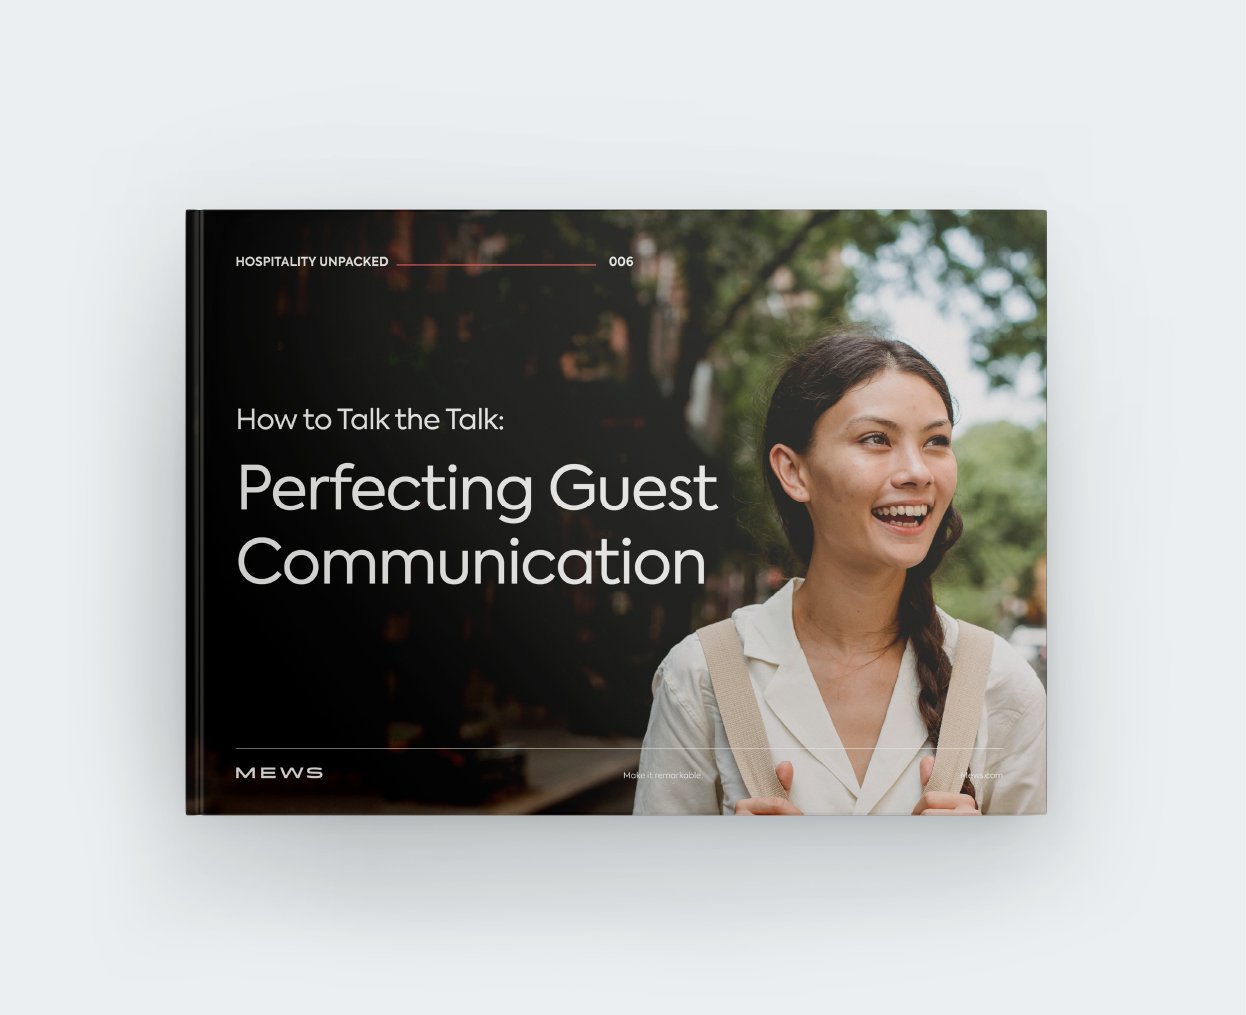 Perfecting_Guest_Communication_Hero - 1245x1014